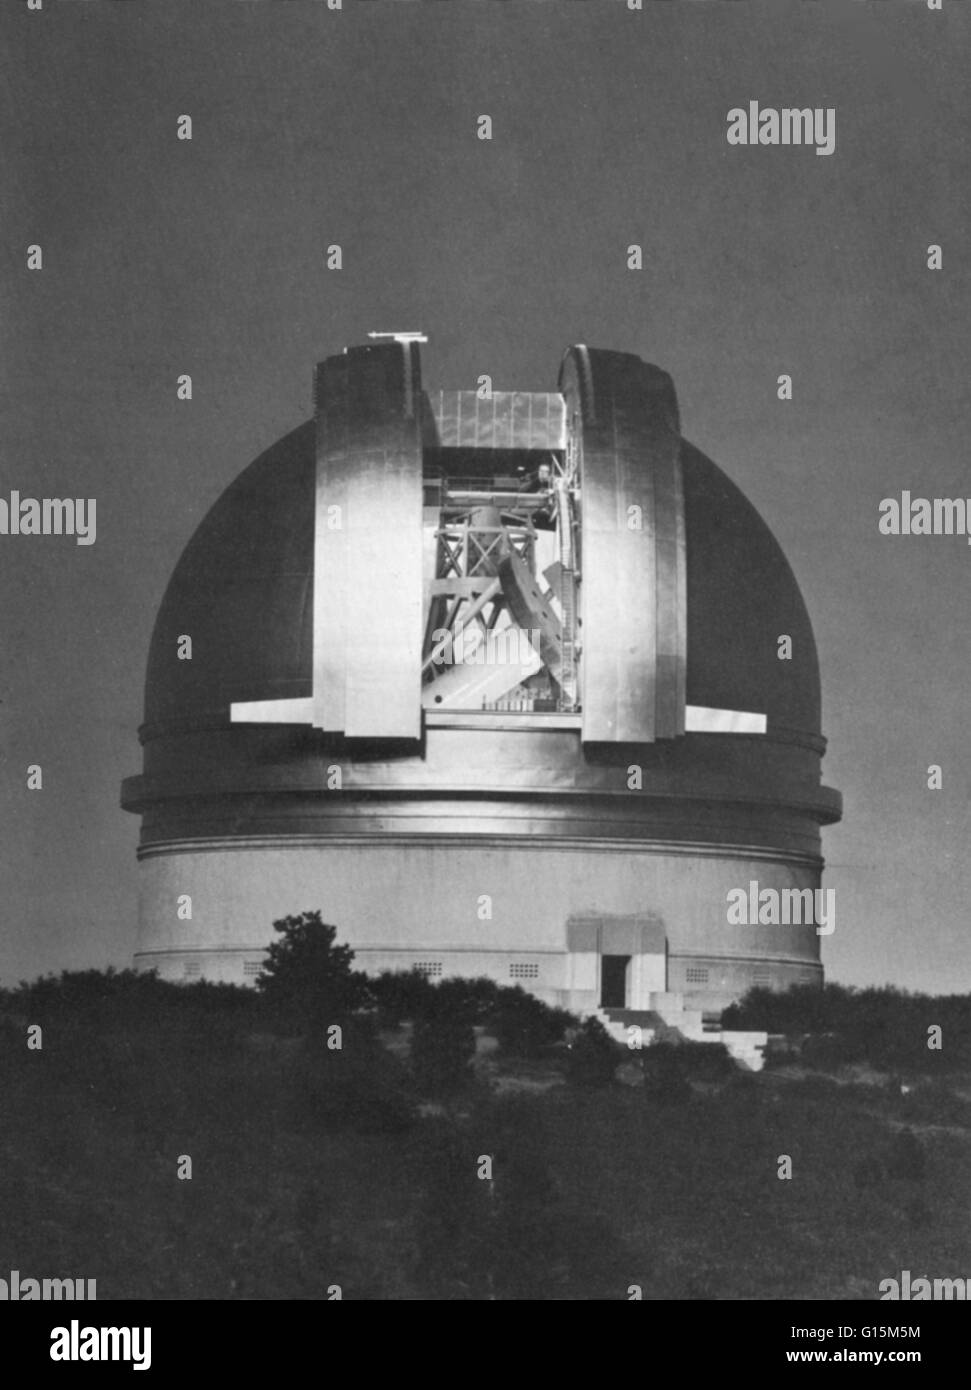 Nighttime view of Palomar Observatory dome with its shutter open. This dome at the Palomar Observatory in California houses the 200-inch Hale telescope, a reflector telescope completed in 1948 and named after the astronomer George Ellery Hale. Palomar Obs Stock Photo